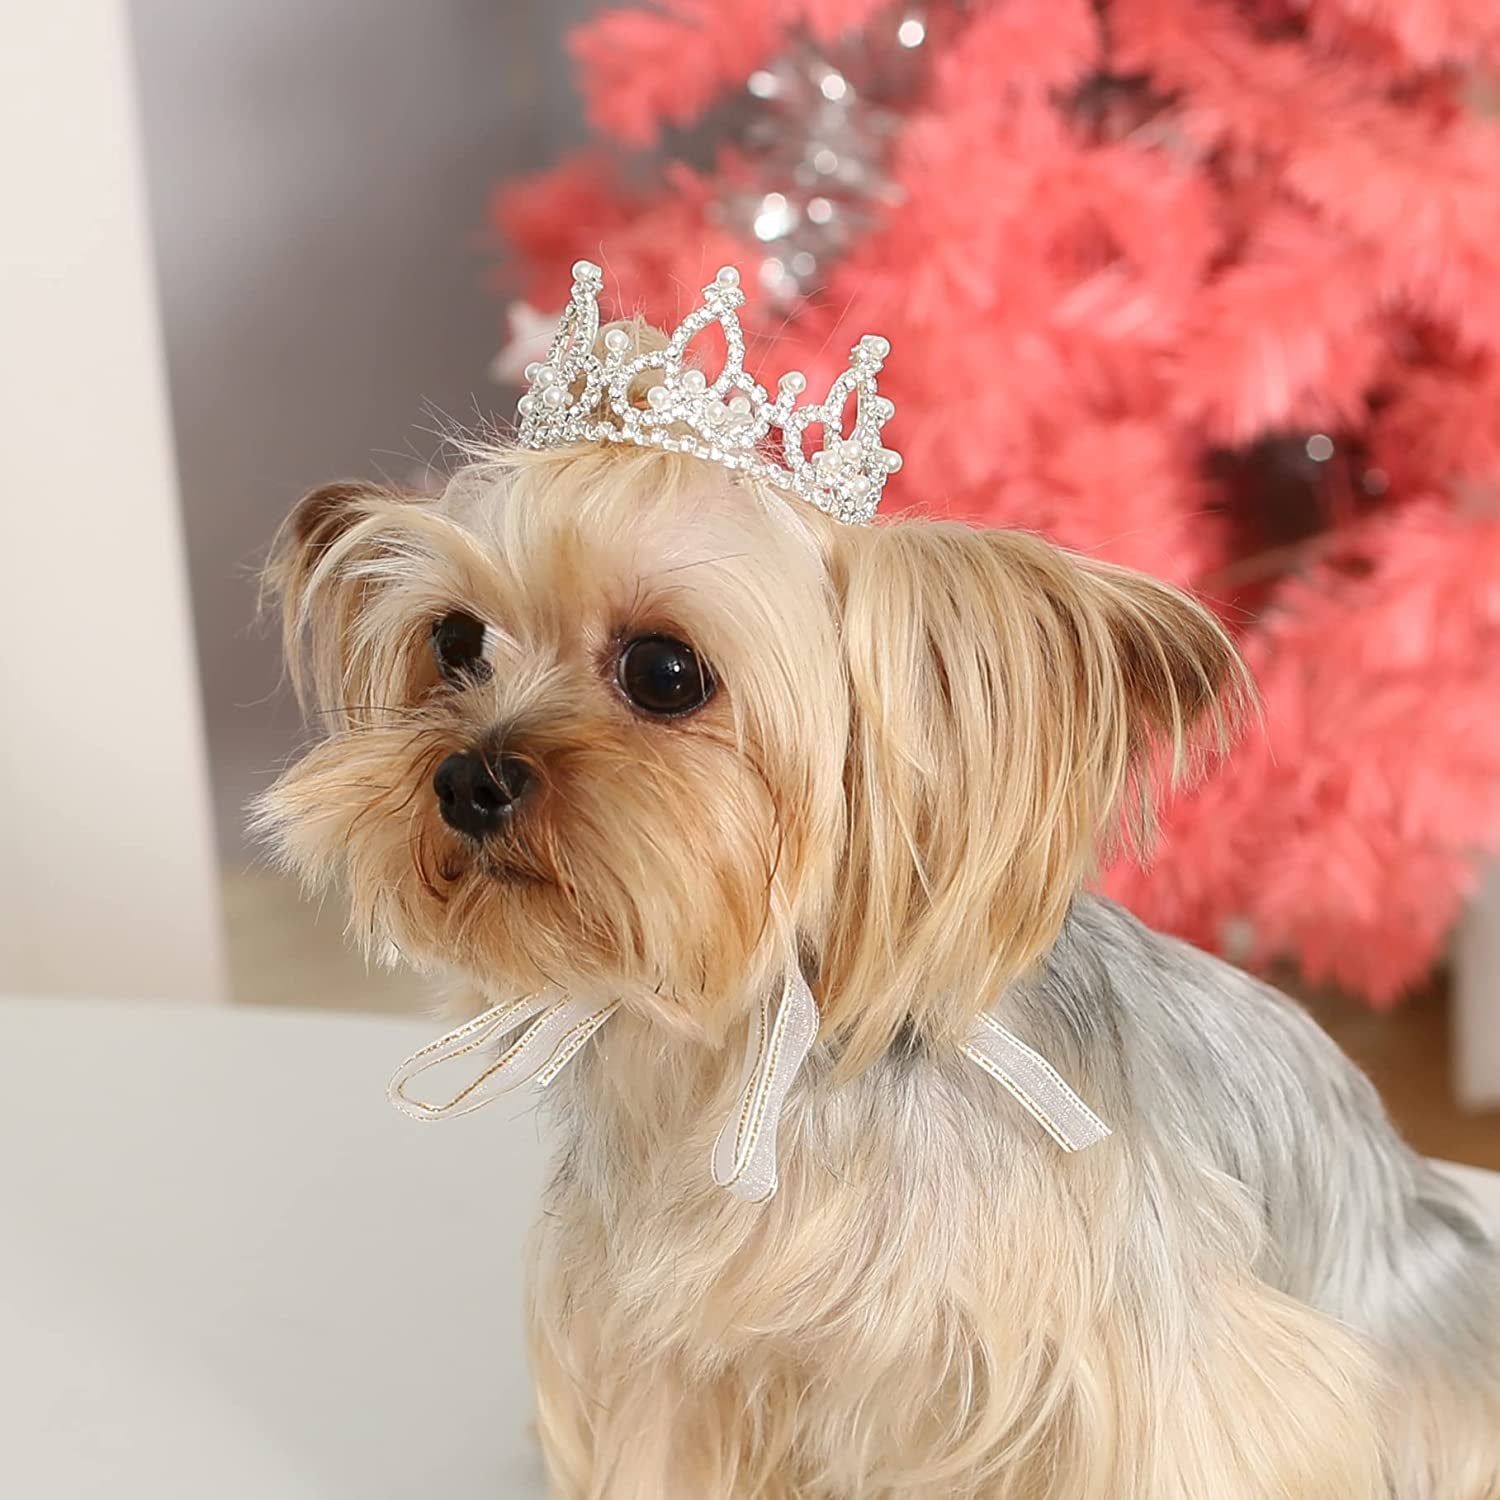 Lovelyshop Pet Series Gold Plated Royal Rhinestone Pearl Full round Dog/Cat Crown for Rolyal Family Costume Hair Accessories-Small Size Animals & Pet Supplies > Pet Supplies > Dog Supplies > Dog Apparel LOVELY SHOP Silver Xsmall 